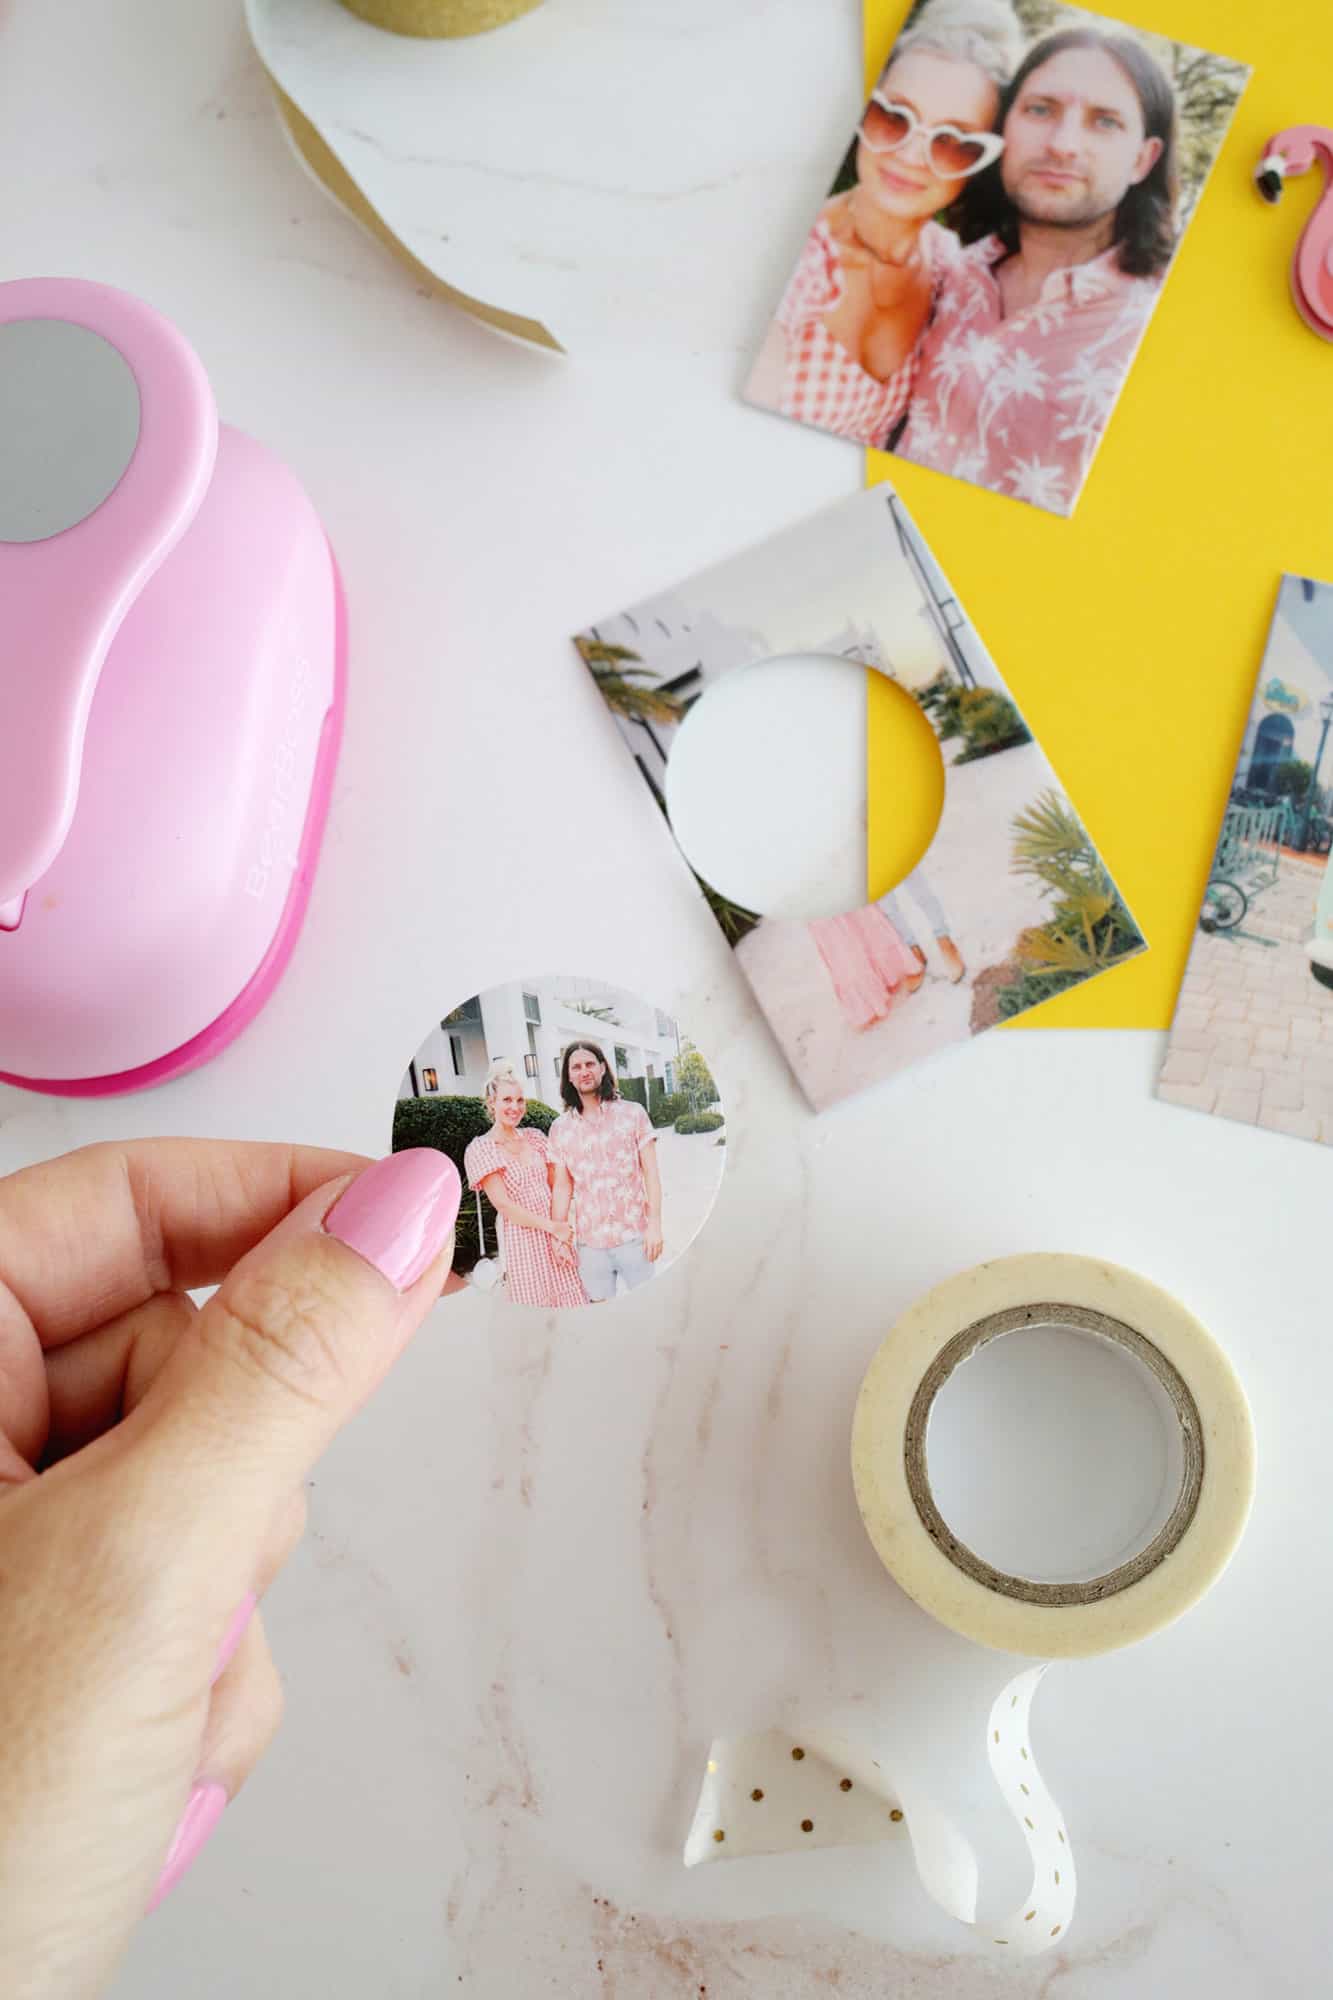 easy scrapbooking idea with photos and stickers cut into shapes with a punch